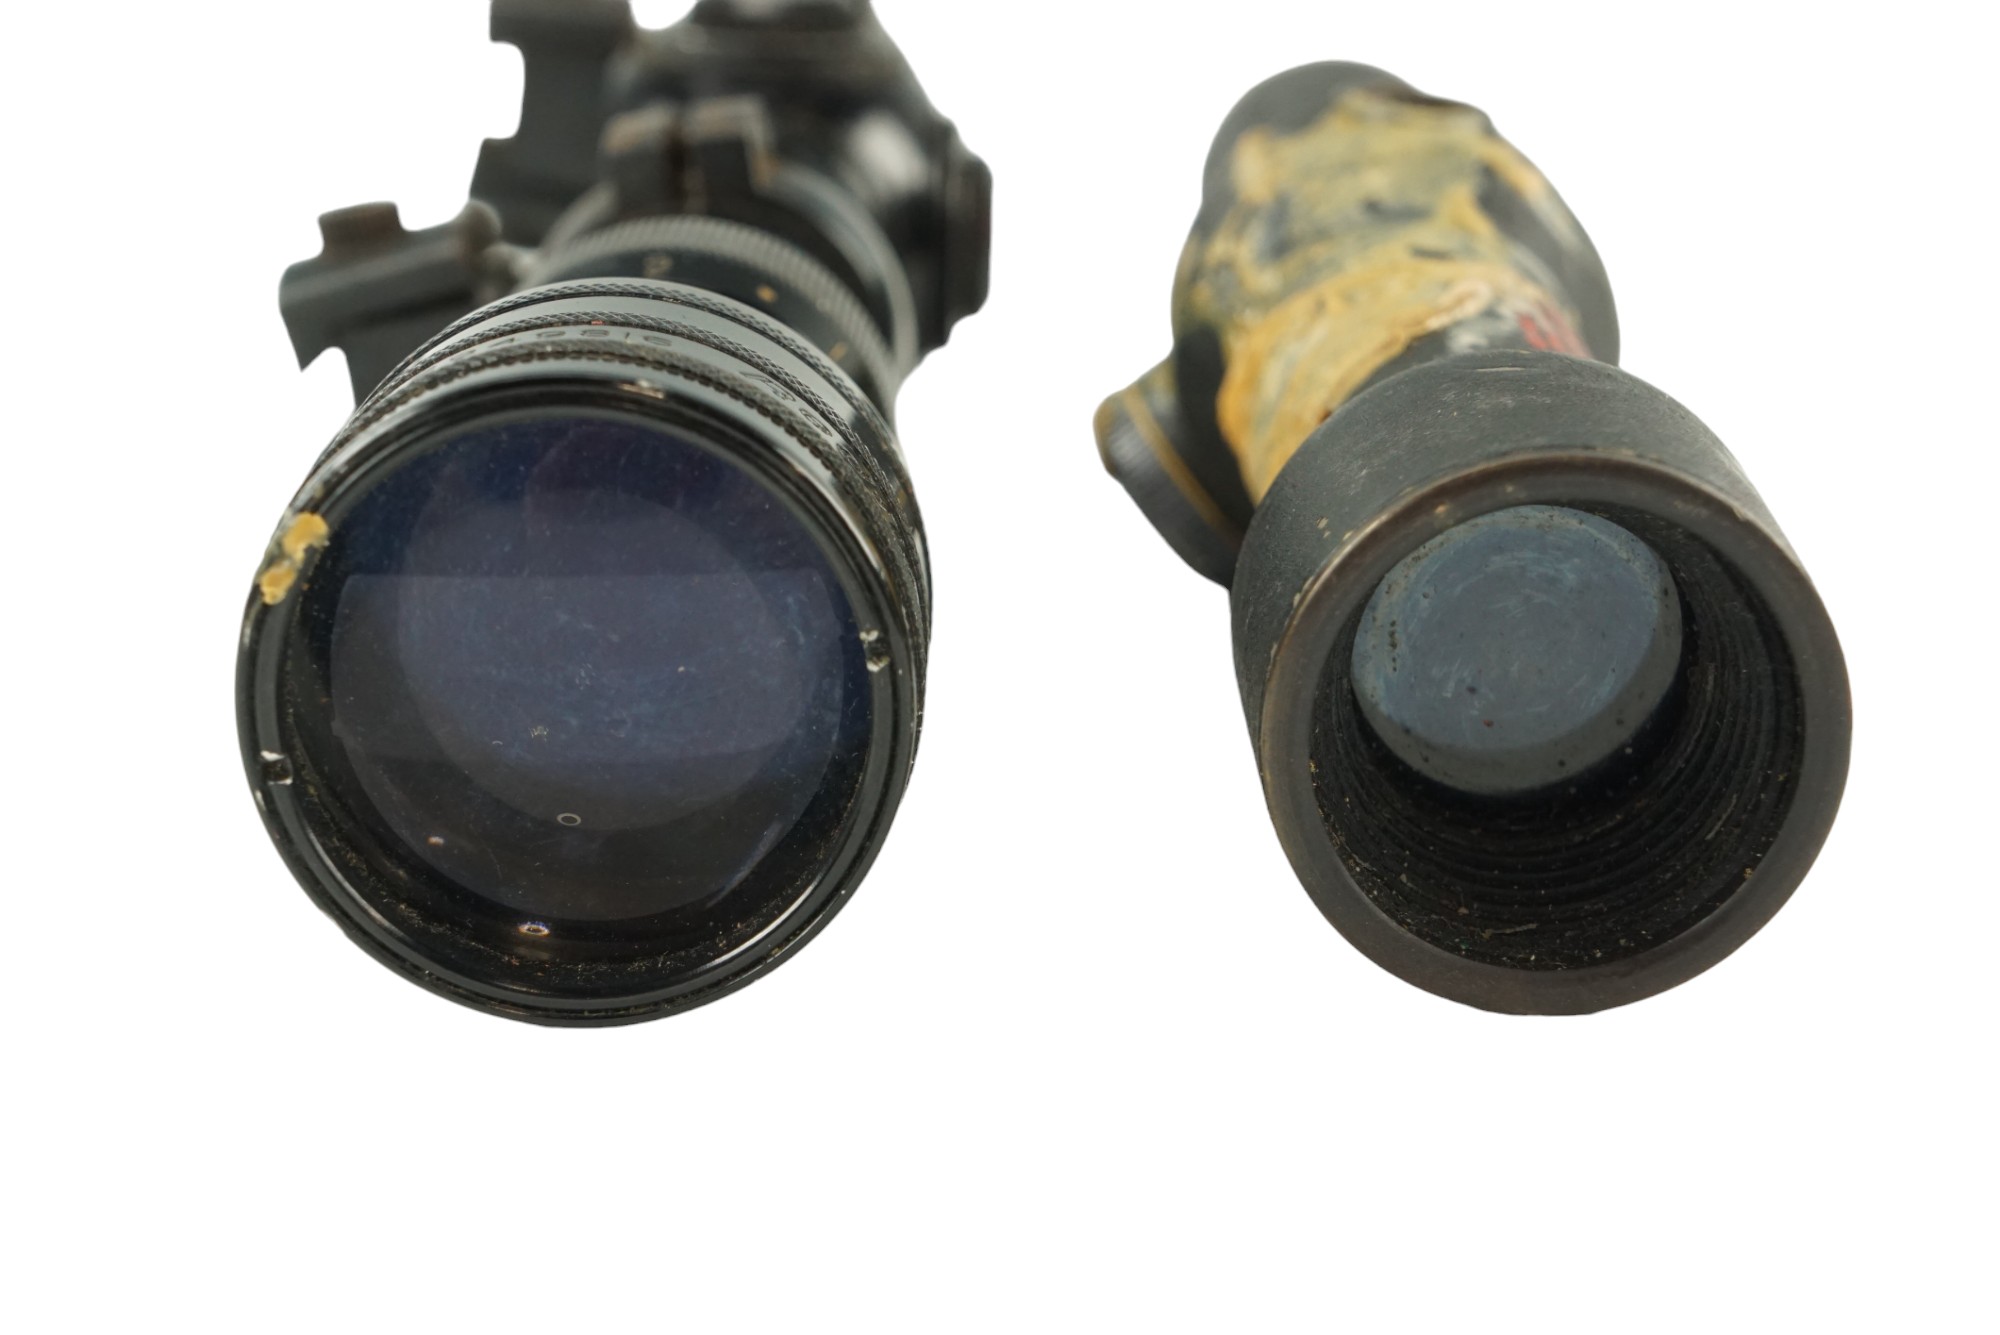 An American Redfield 1x - 4x magnification telescopic rifle sight together with a Redpoint red dot - Image 3 of 4